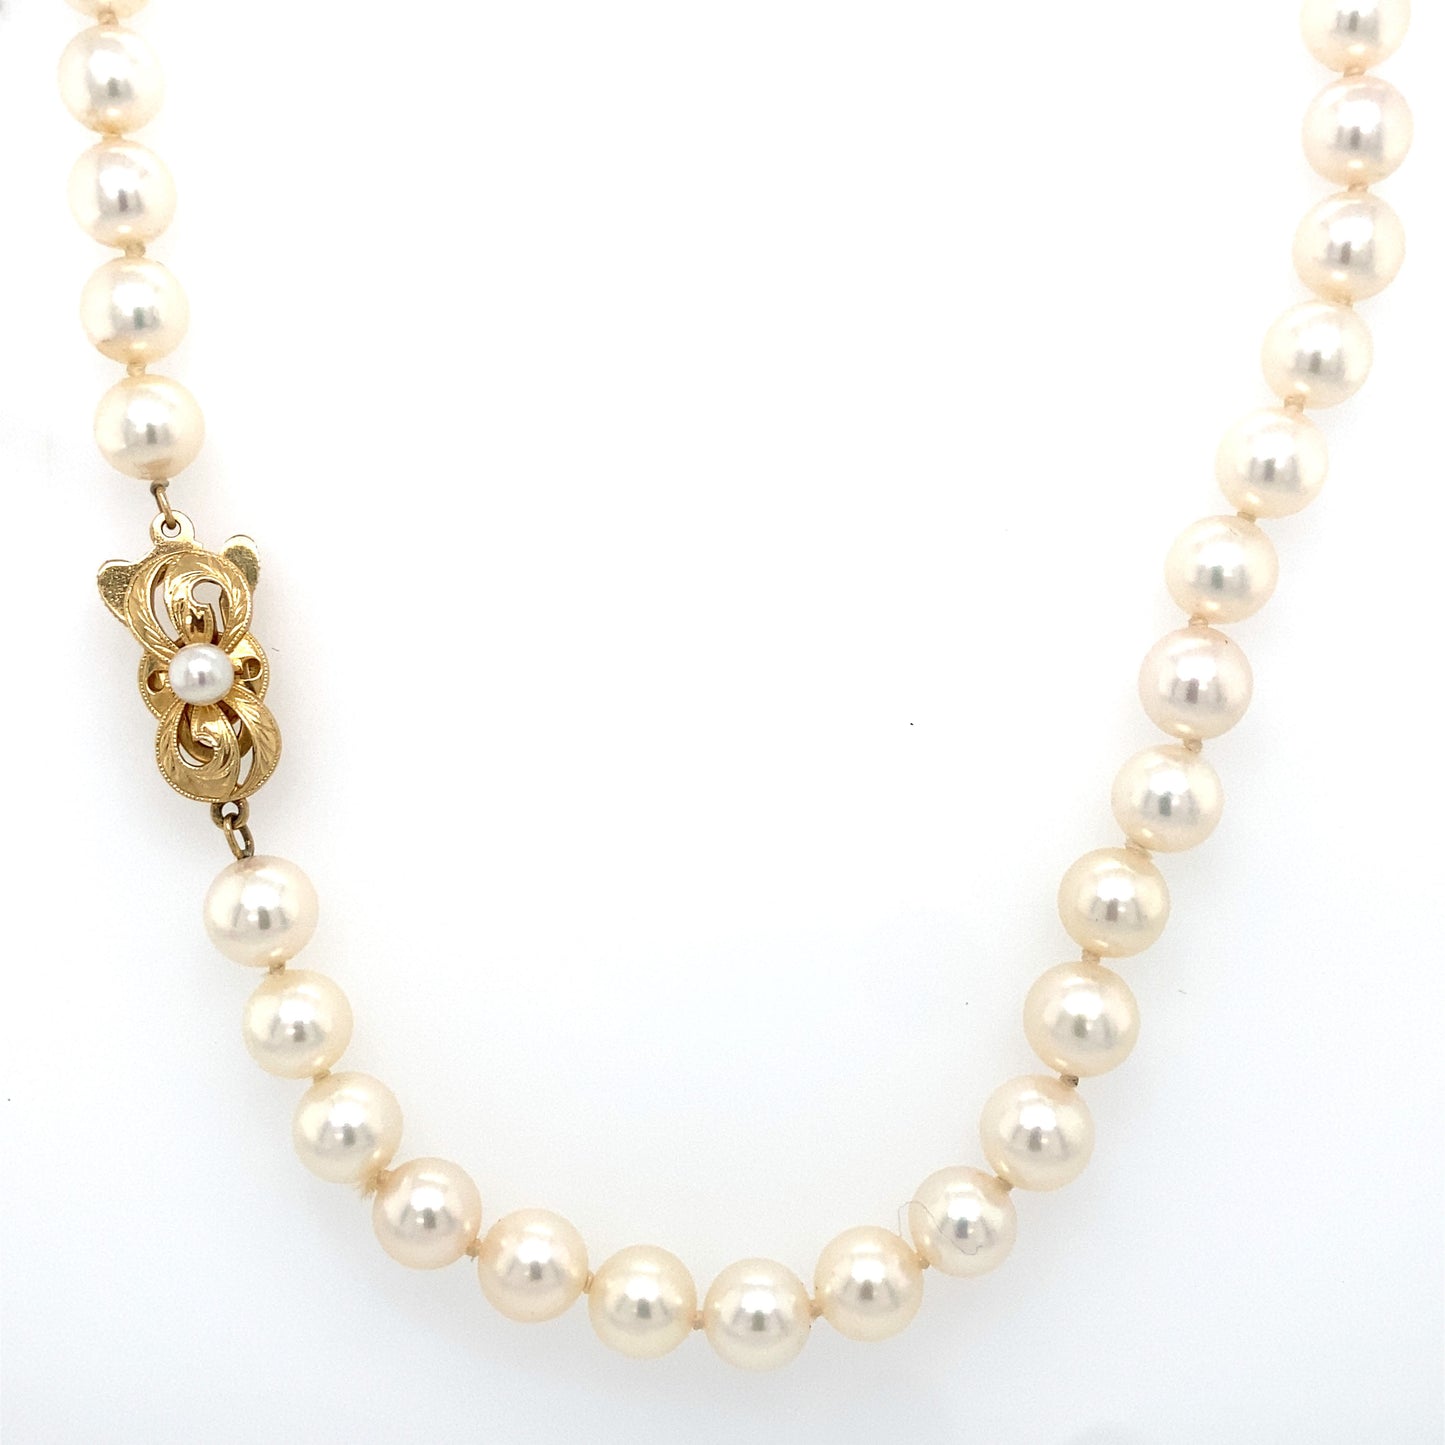 Mikimoto 6.5mm Pearl Necklace with 18K Gold Clasp